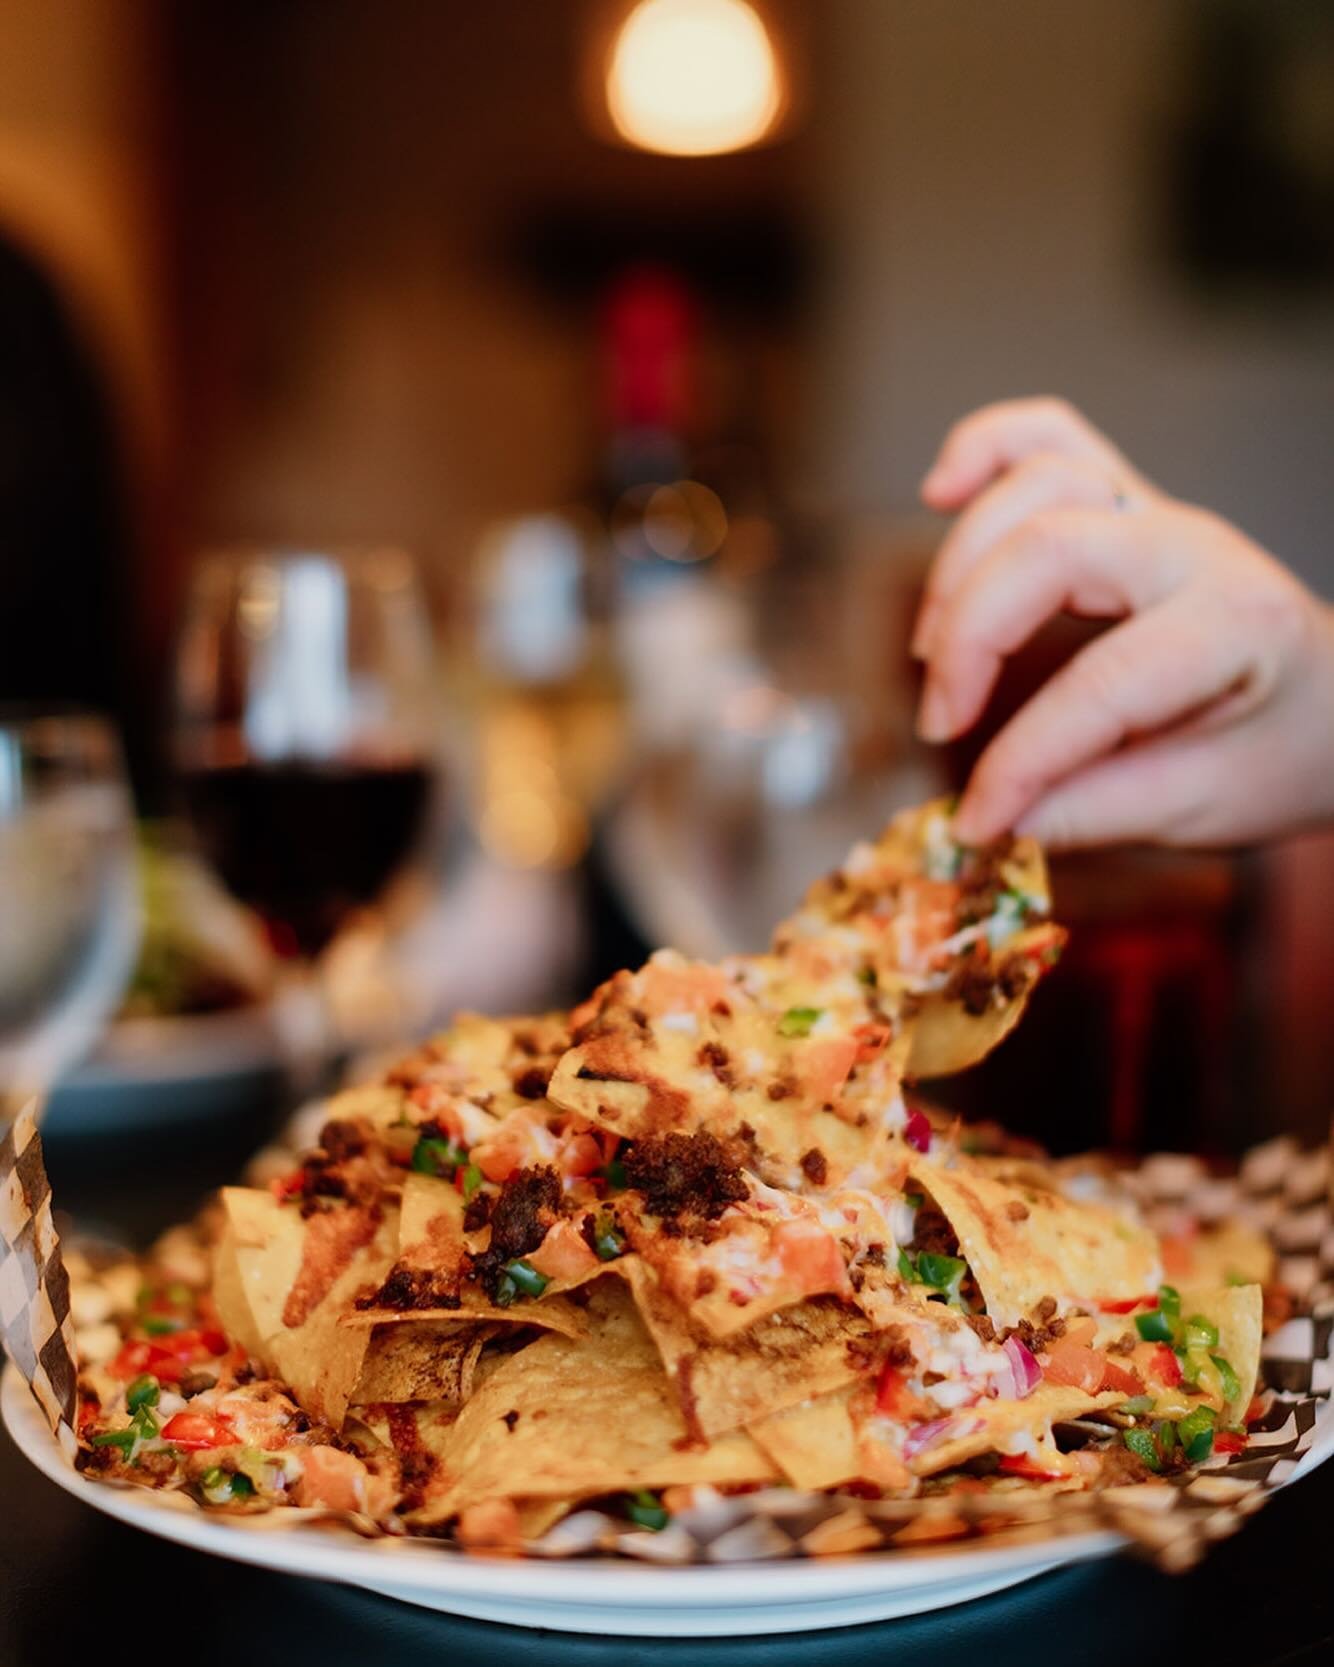 Come and join us today for our FAMOUS nachos! 

Our homemade tortilla chips loaded to perfection are defenitly a feature you don&rsquo;t want to miss!

👨&zwj;🍳 Reservations 905-377-8177
🖥️ Link in bio or find us on open table
⏰ Kitchen is open 12-